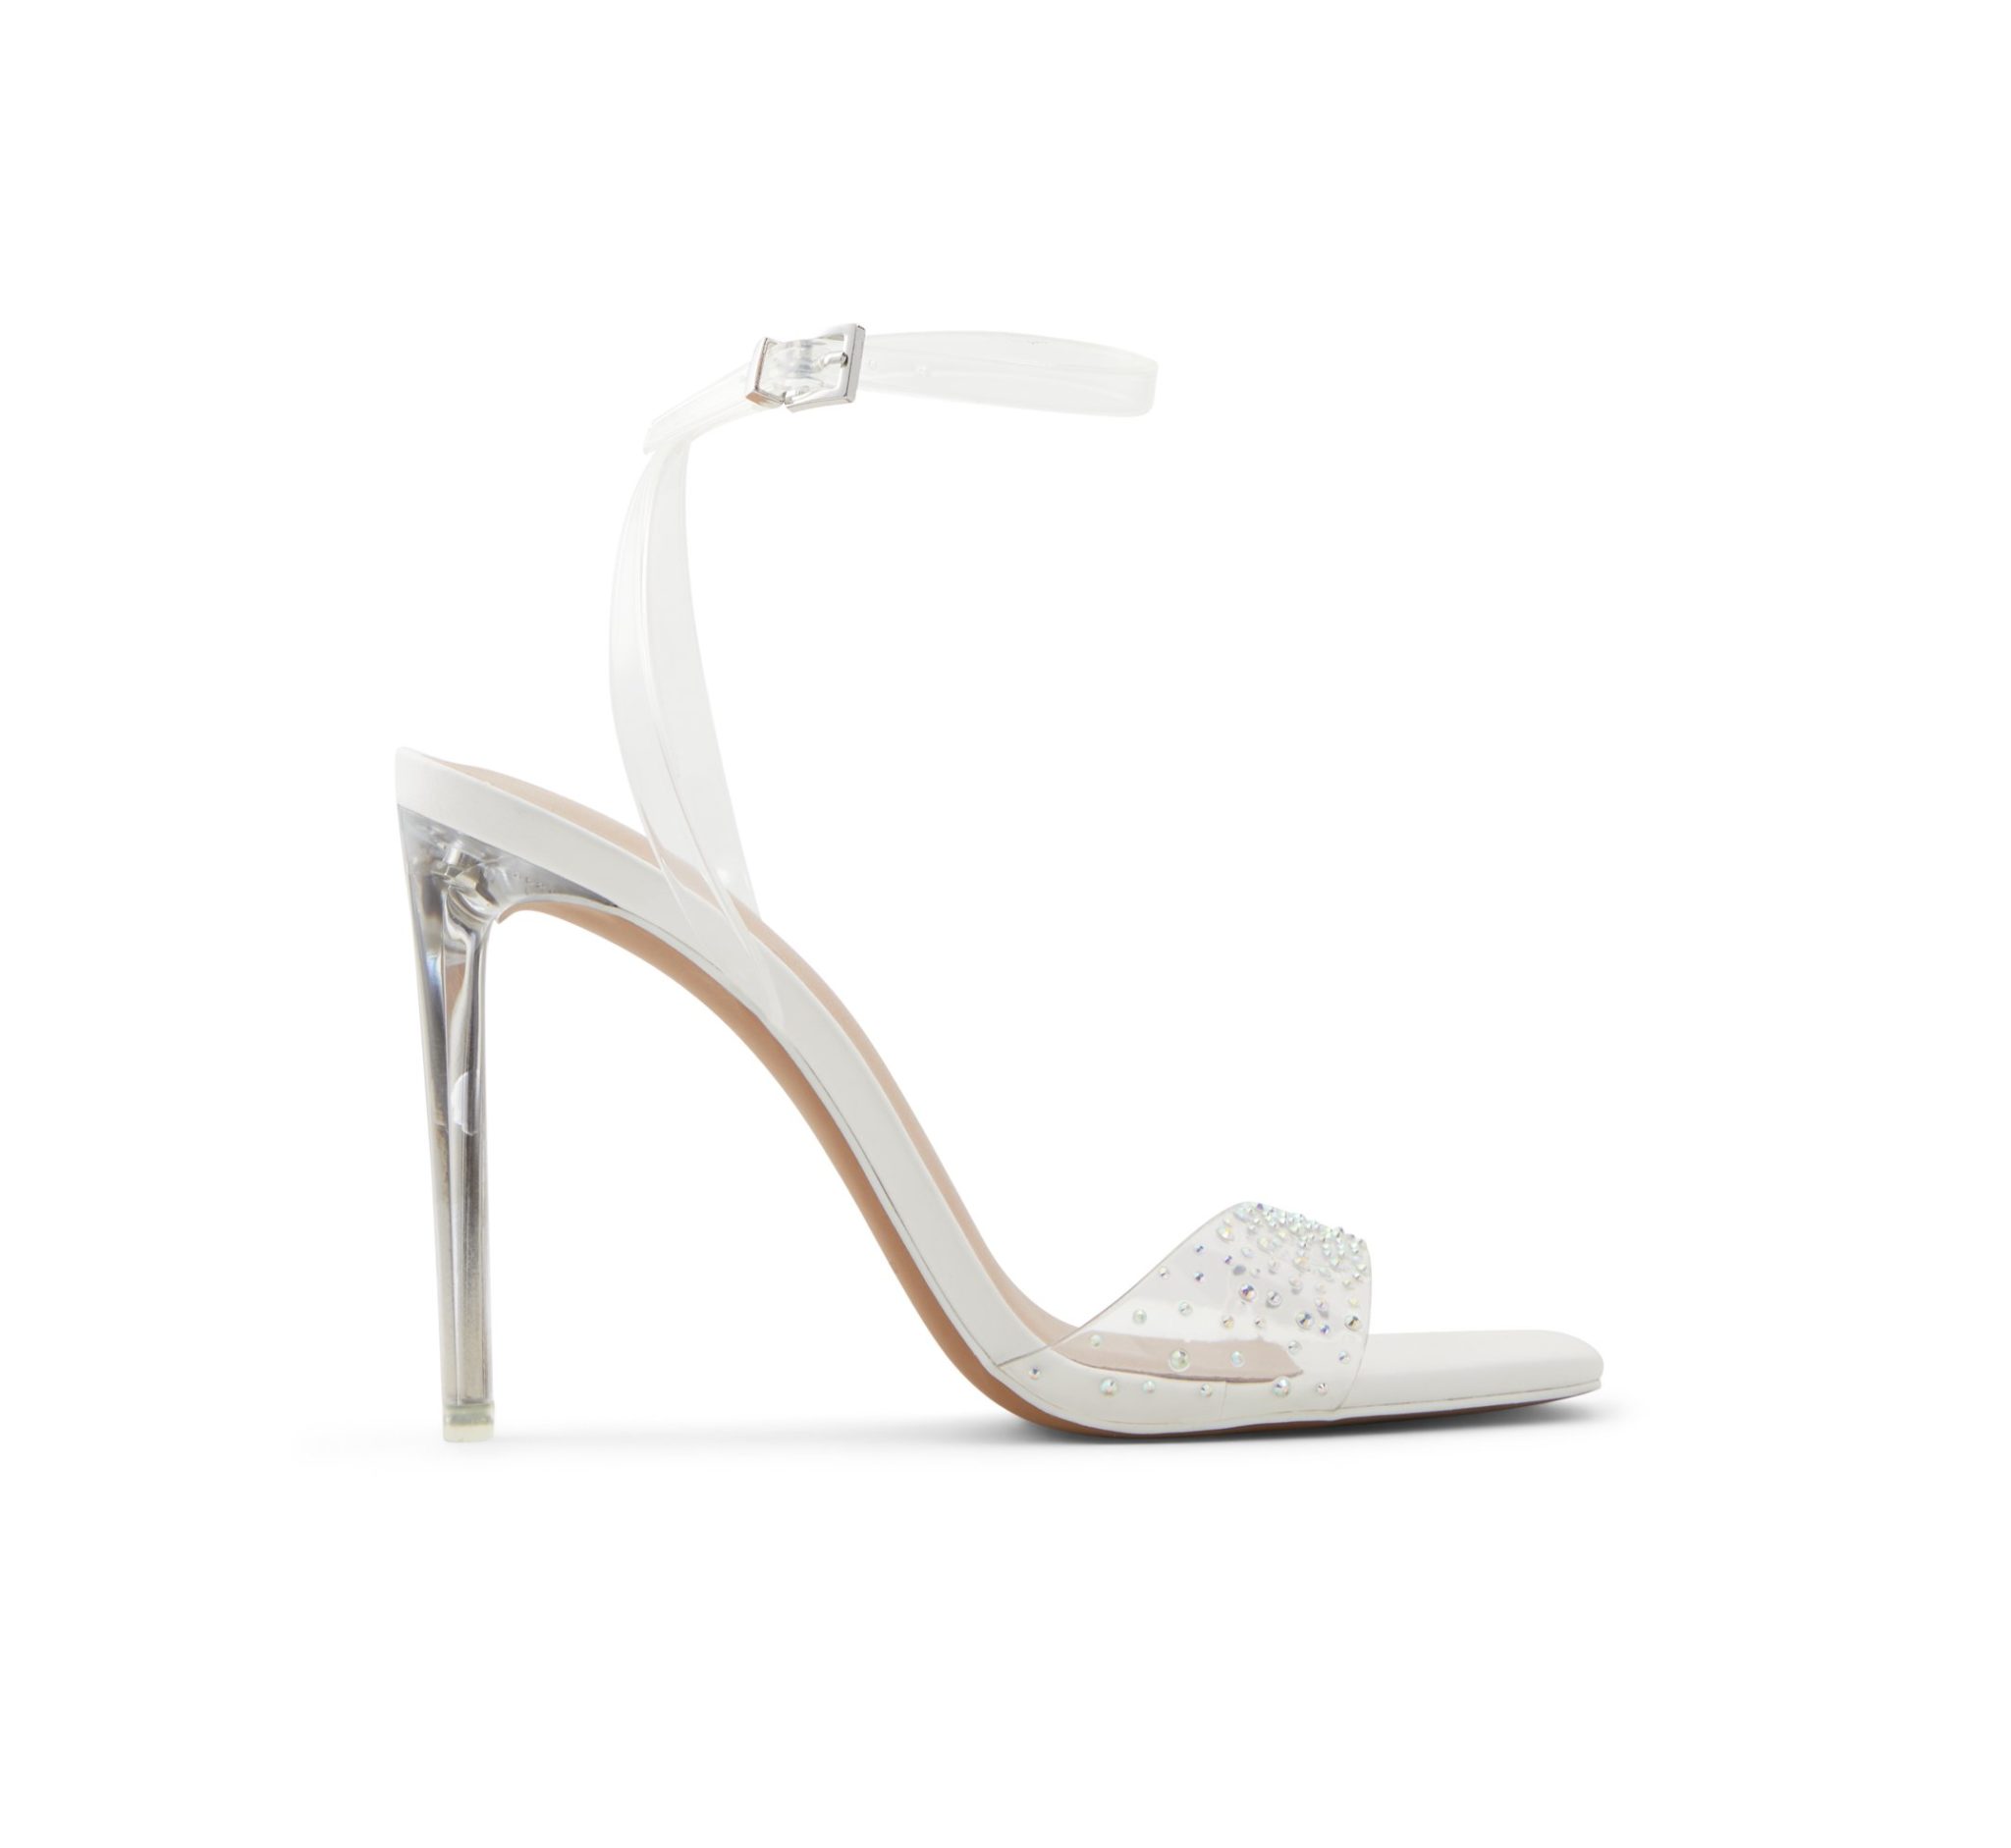 Stunning Wedding Shoes for the Fashionable Bride